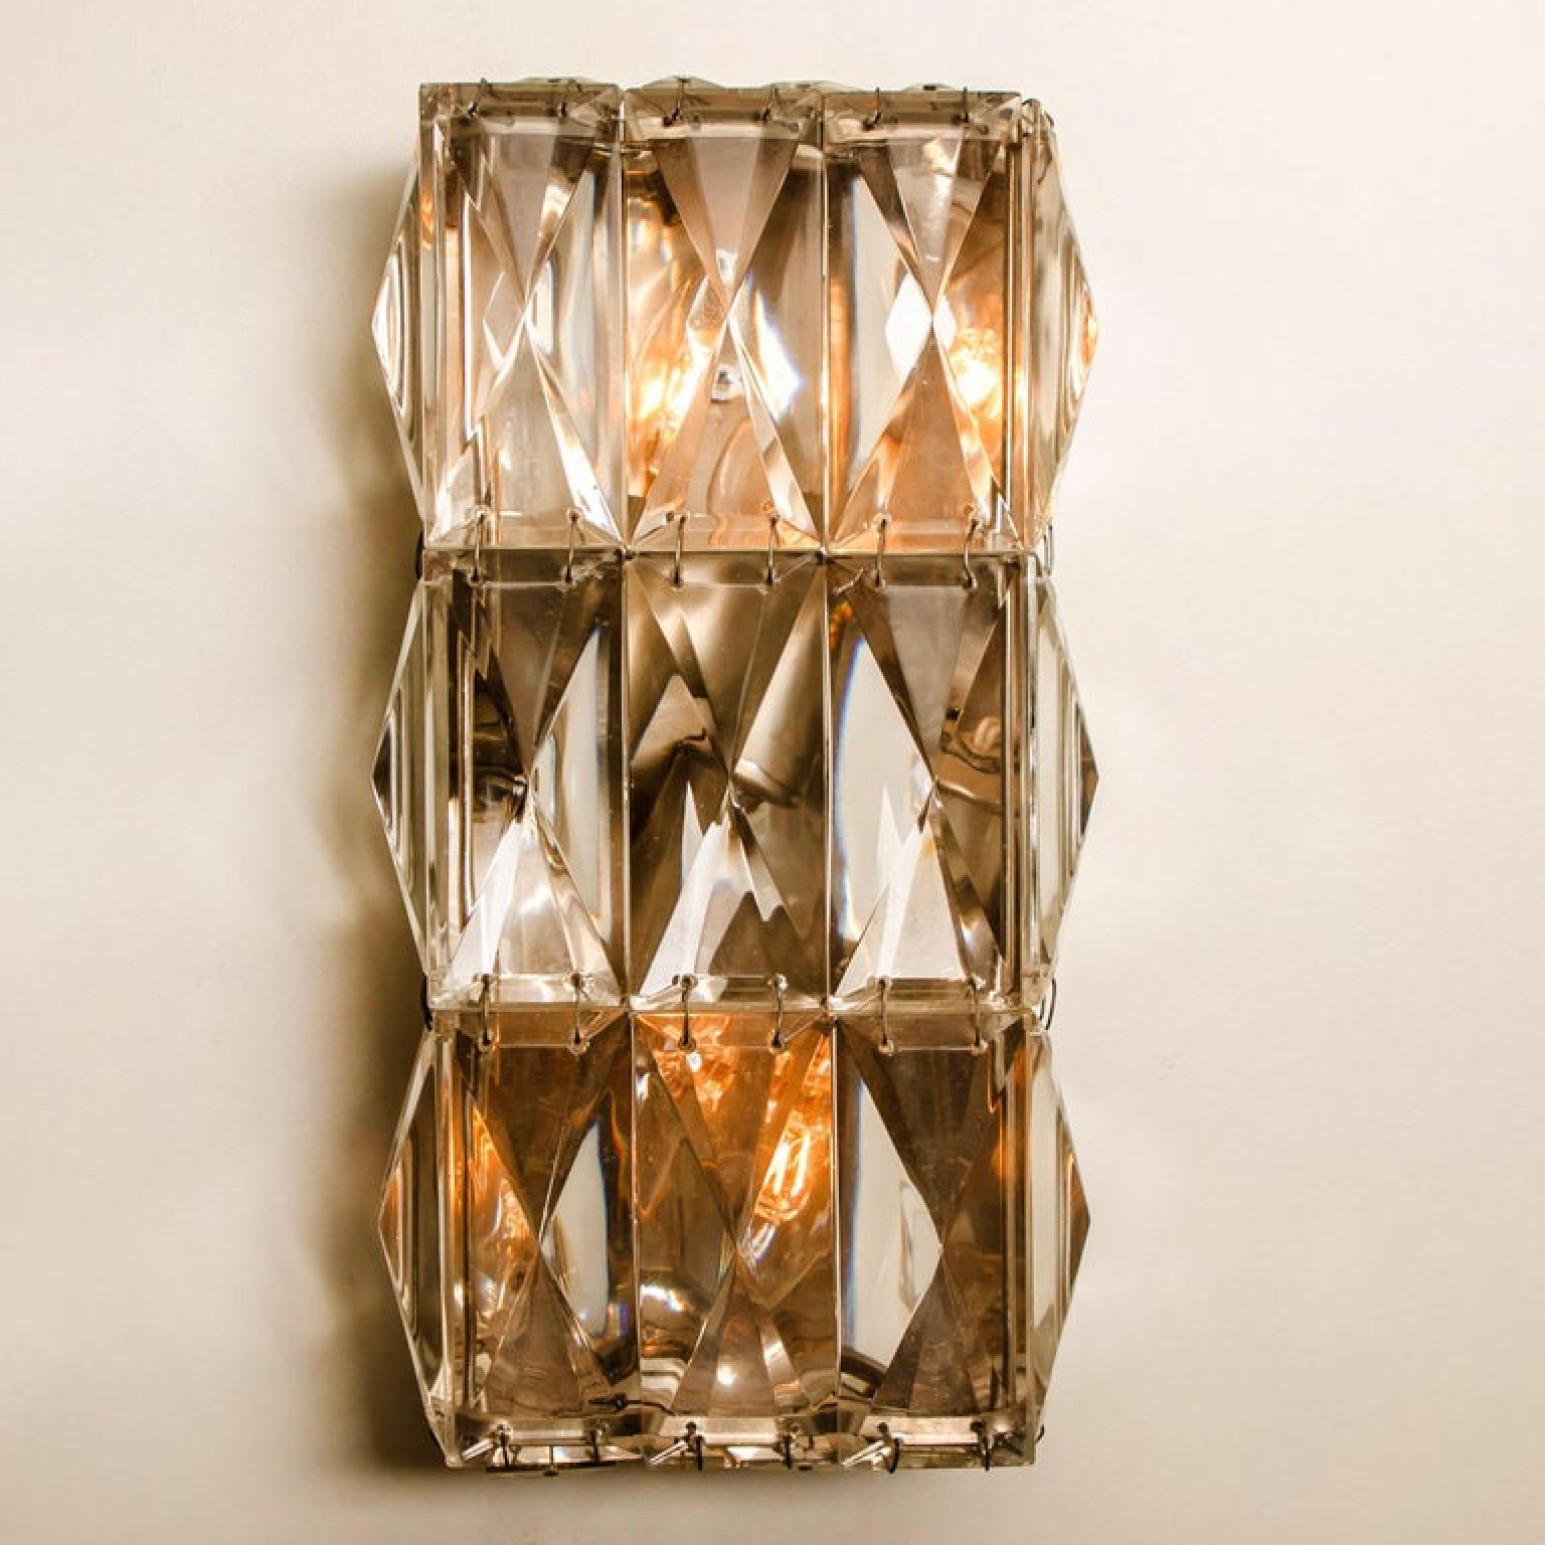 Pair of Palwa Wall Light Fixtures, Chrome-Plated Crystal Glass, 1970 For Sale 4